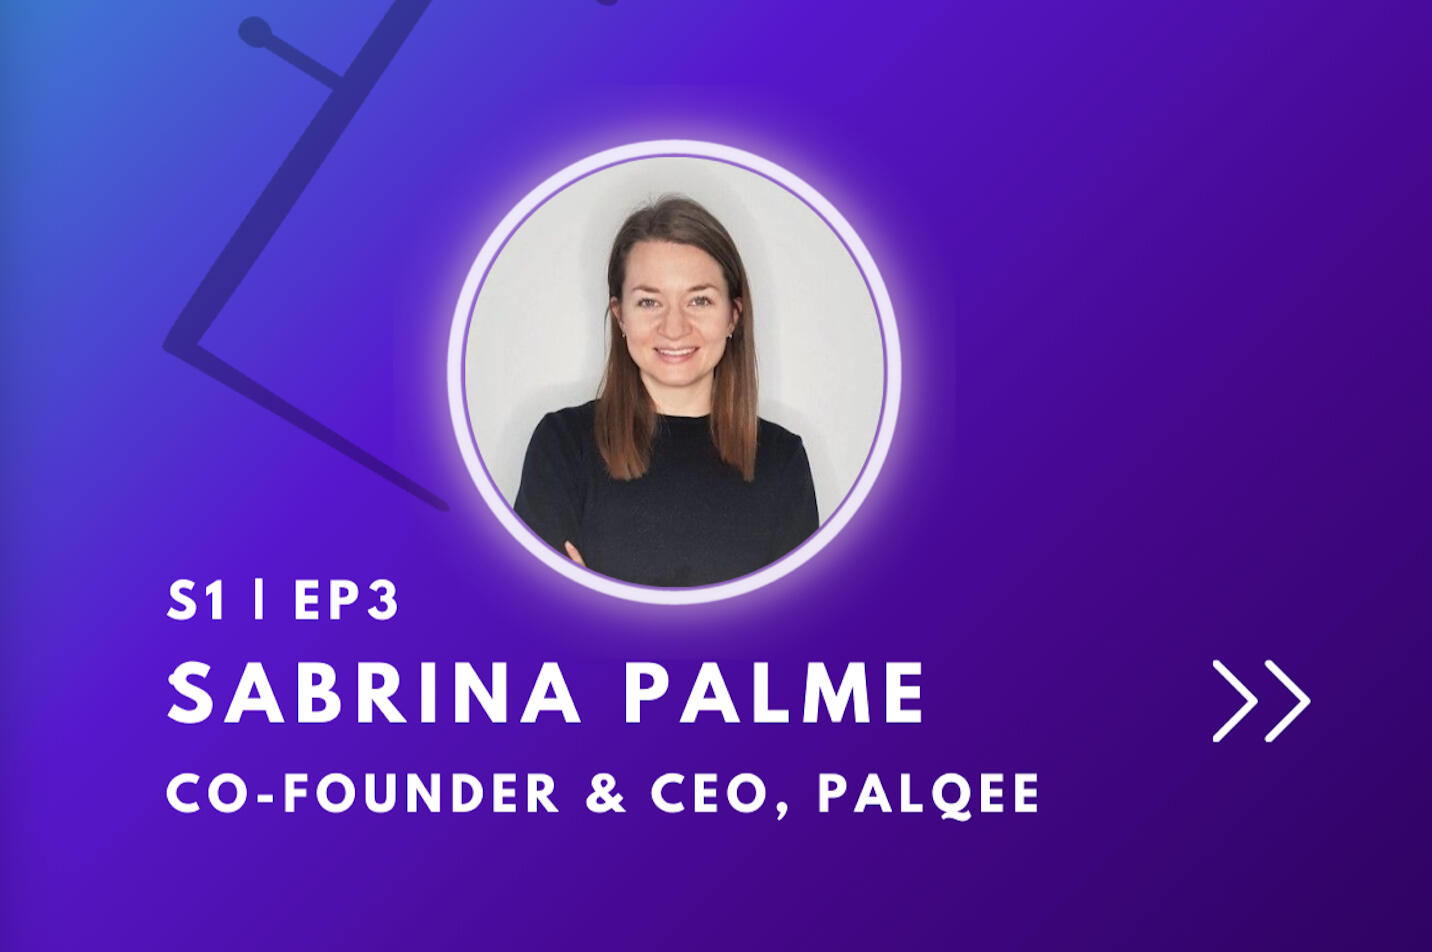 guest sabrina palme. ceo of palqee on purple gradient background.